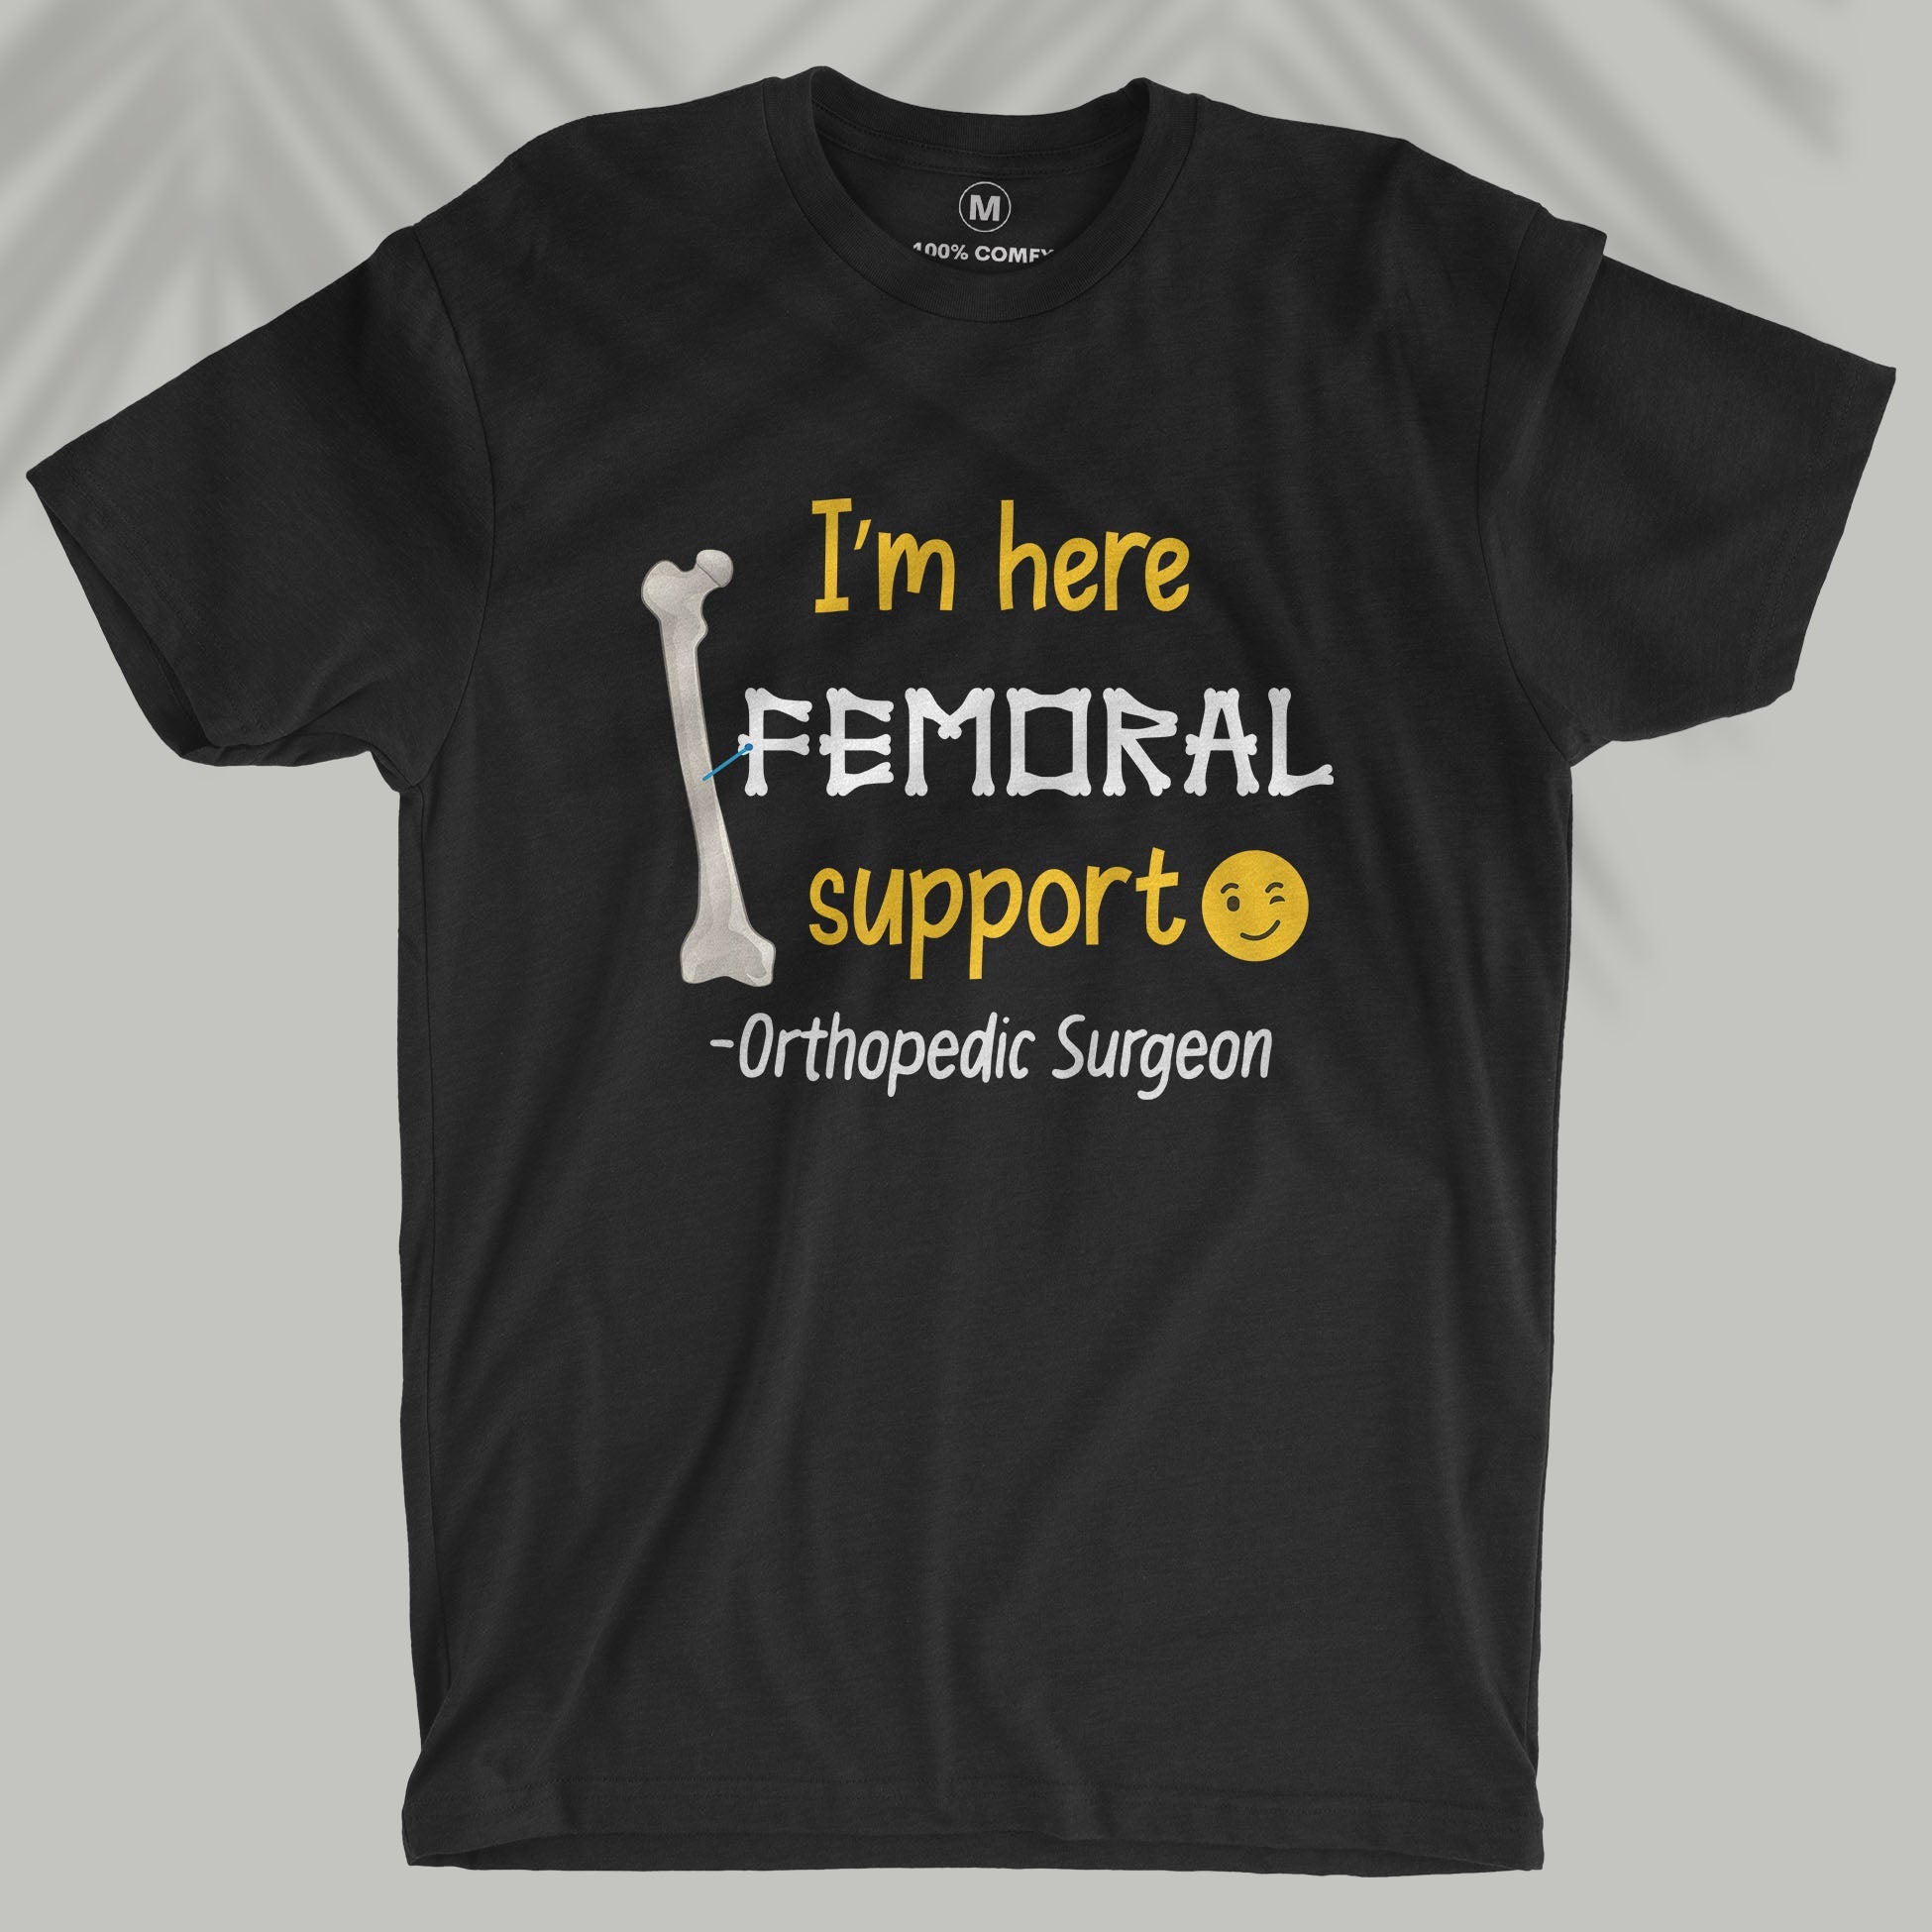 For Moral Support - Unisex T-shirt